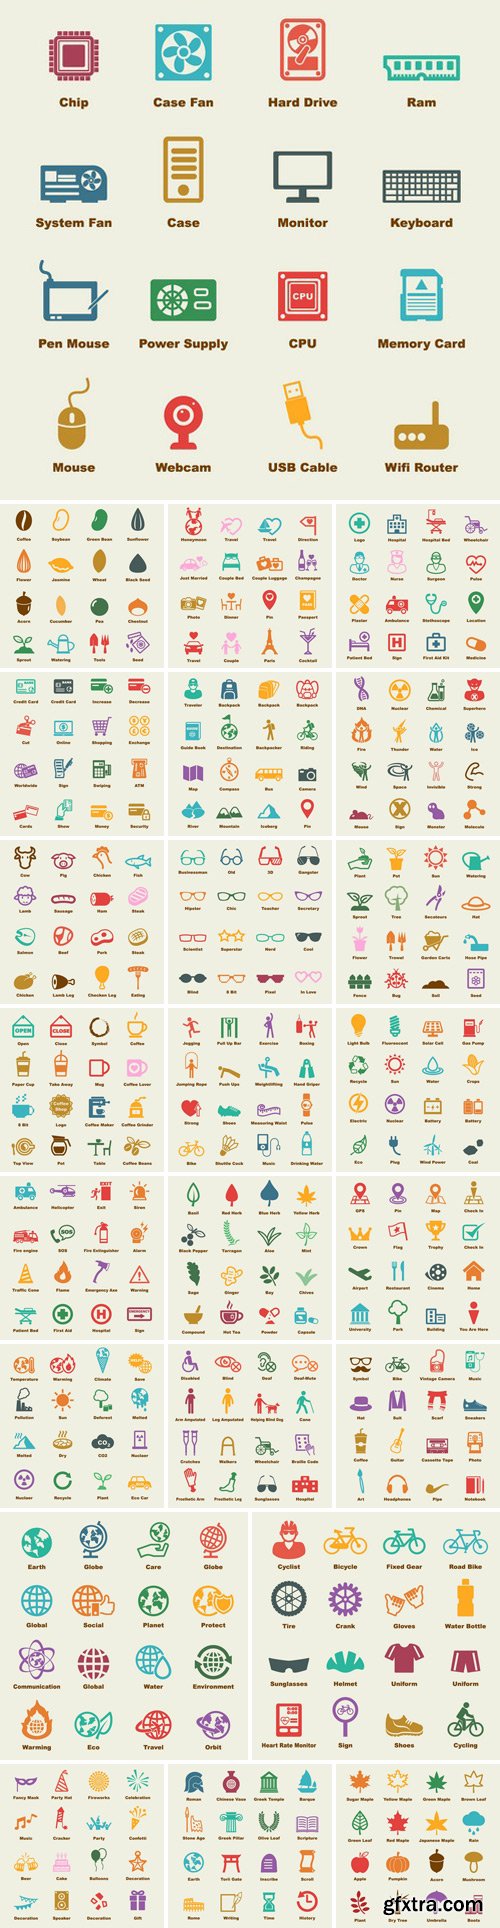 Stock Vectors - Different Sets Of Icons 2 Vector Infographic Icons